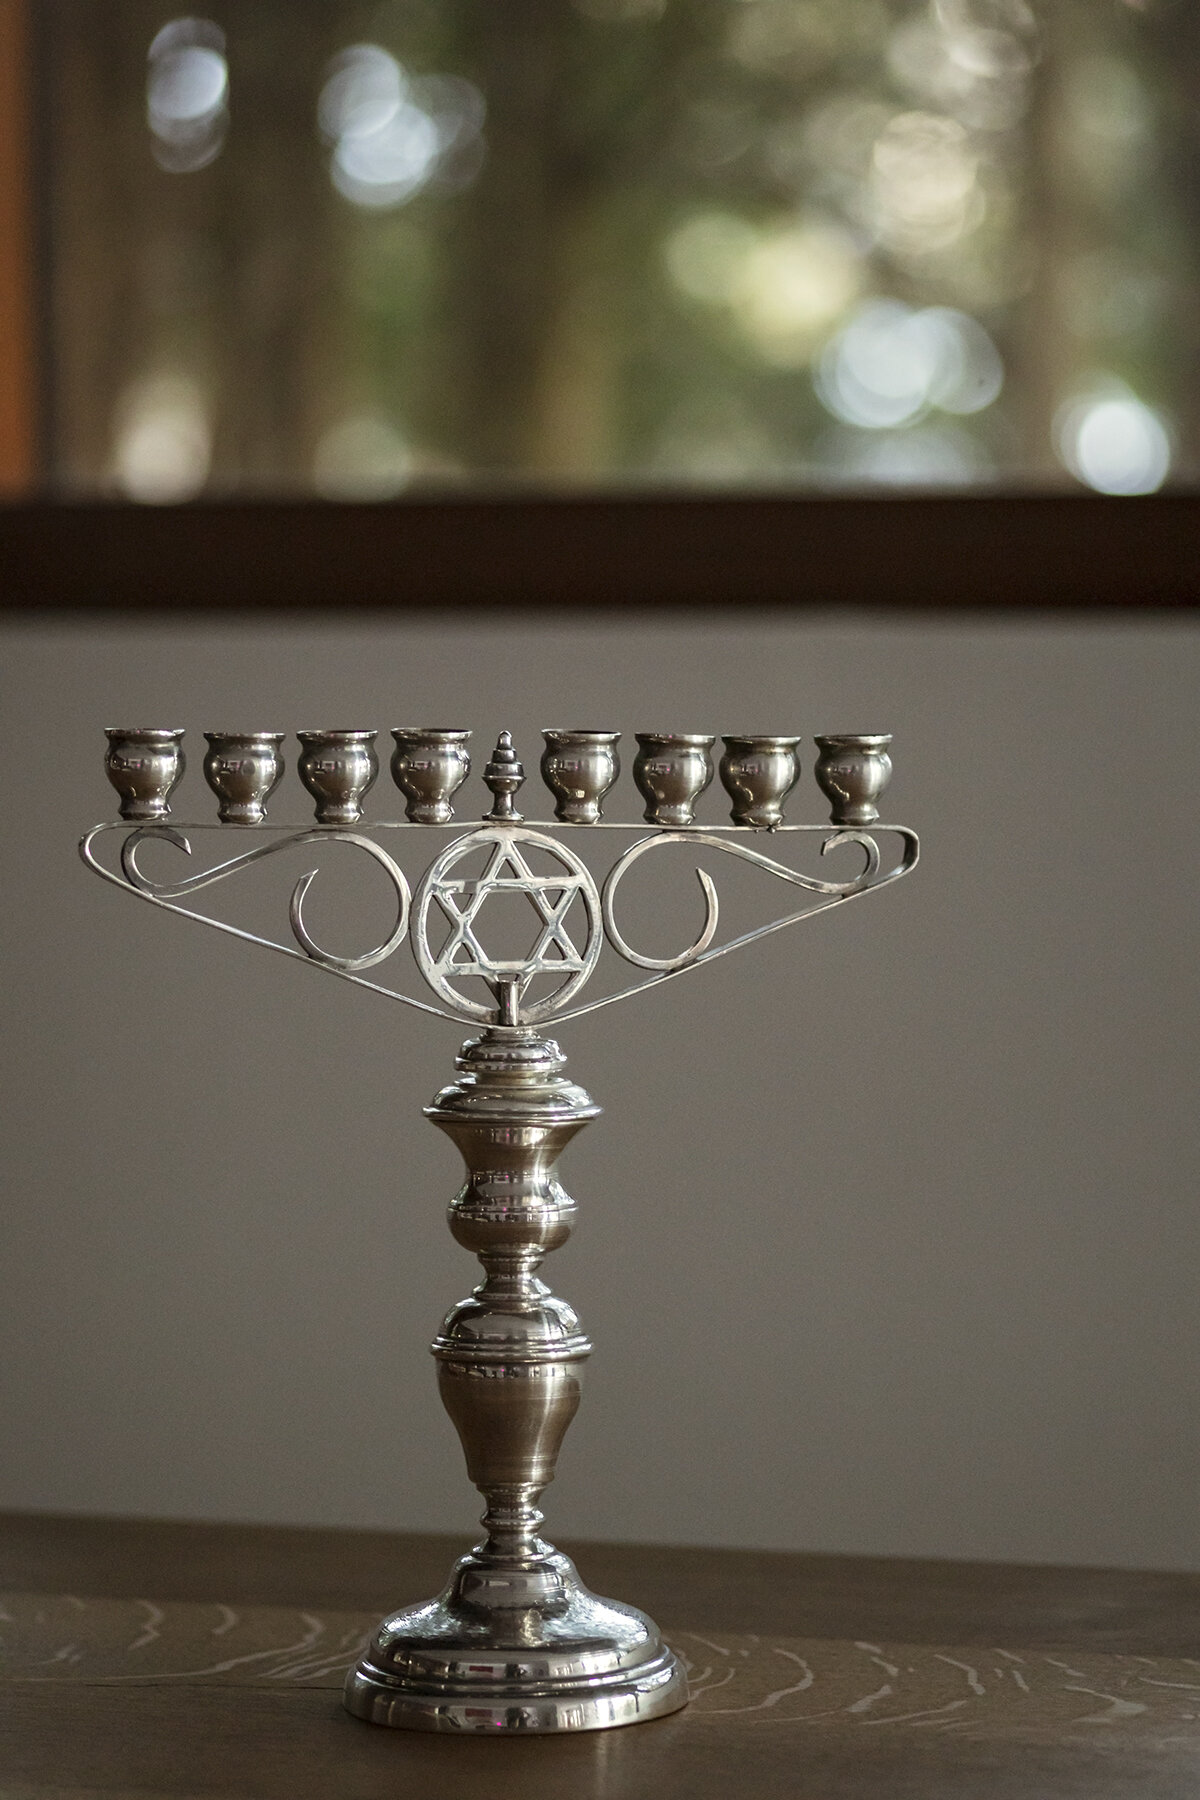 Family menorah brought to Israel from Vienna